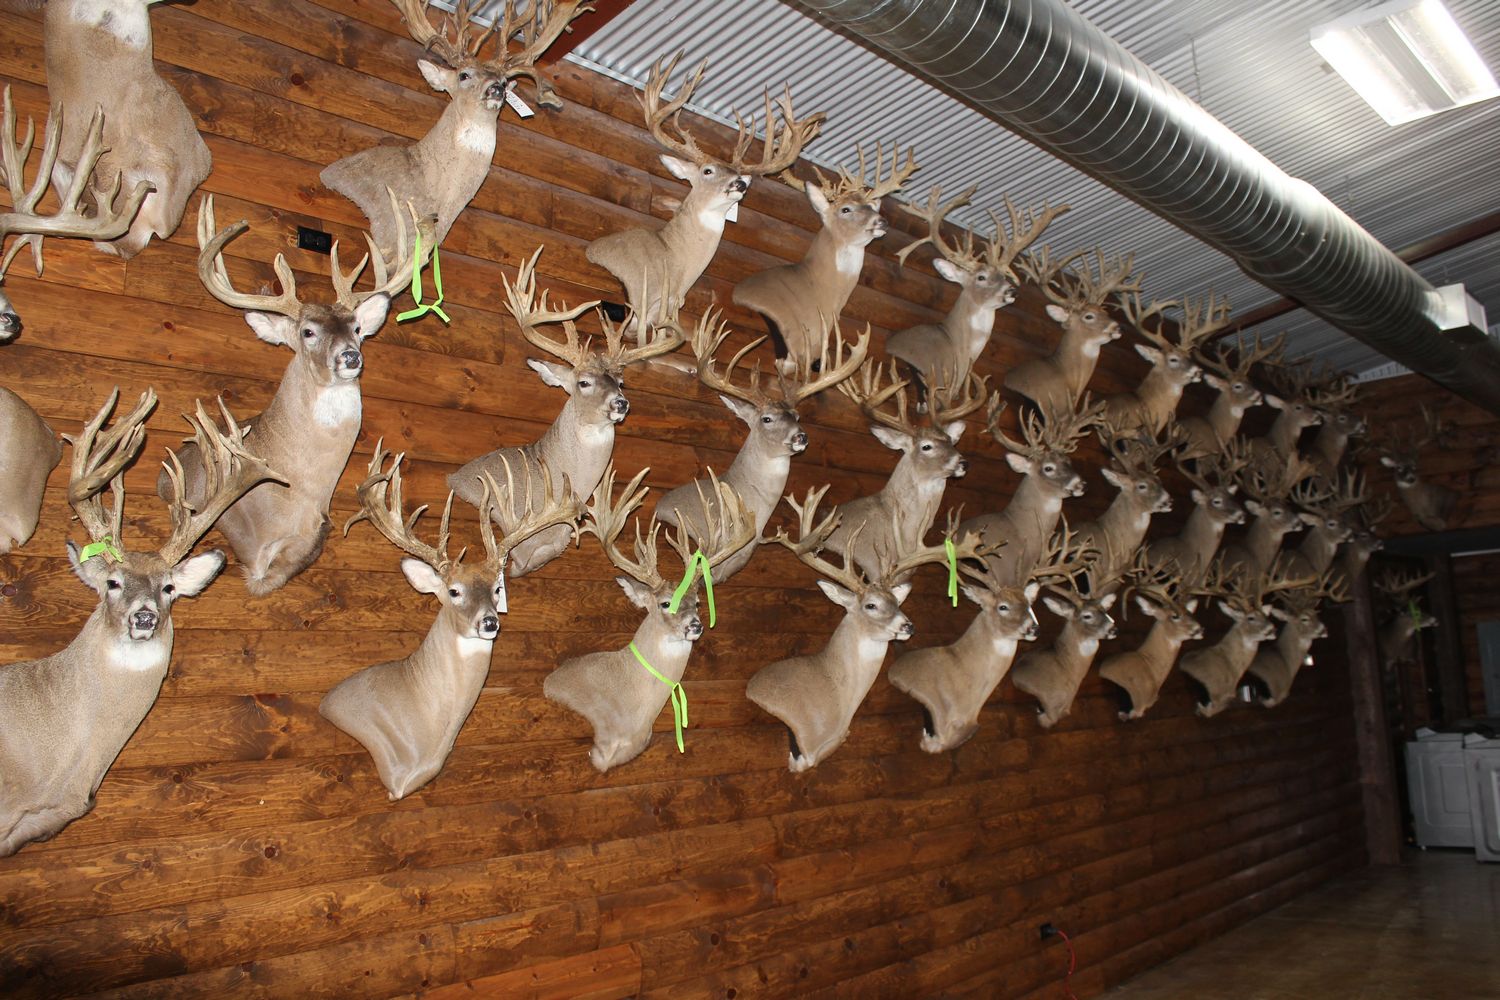 Boone and Crockett Whitetail Deer Collection